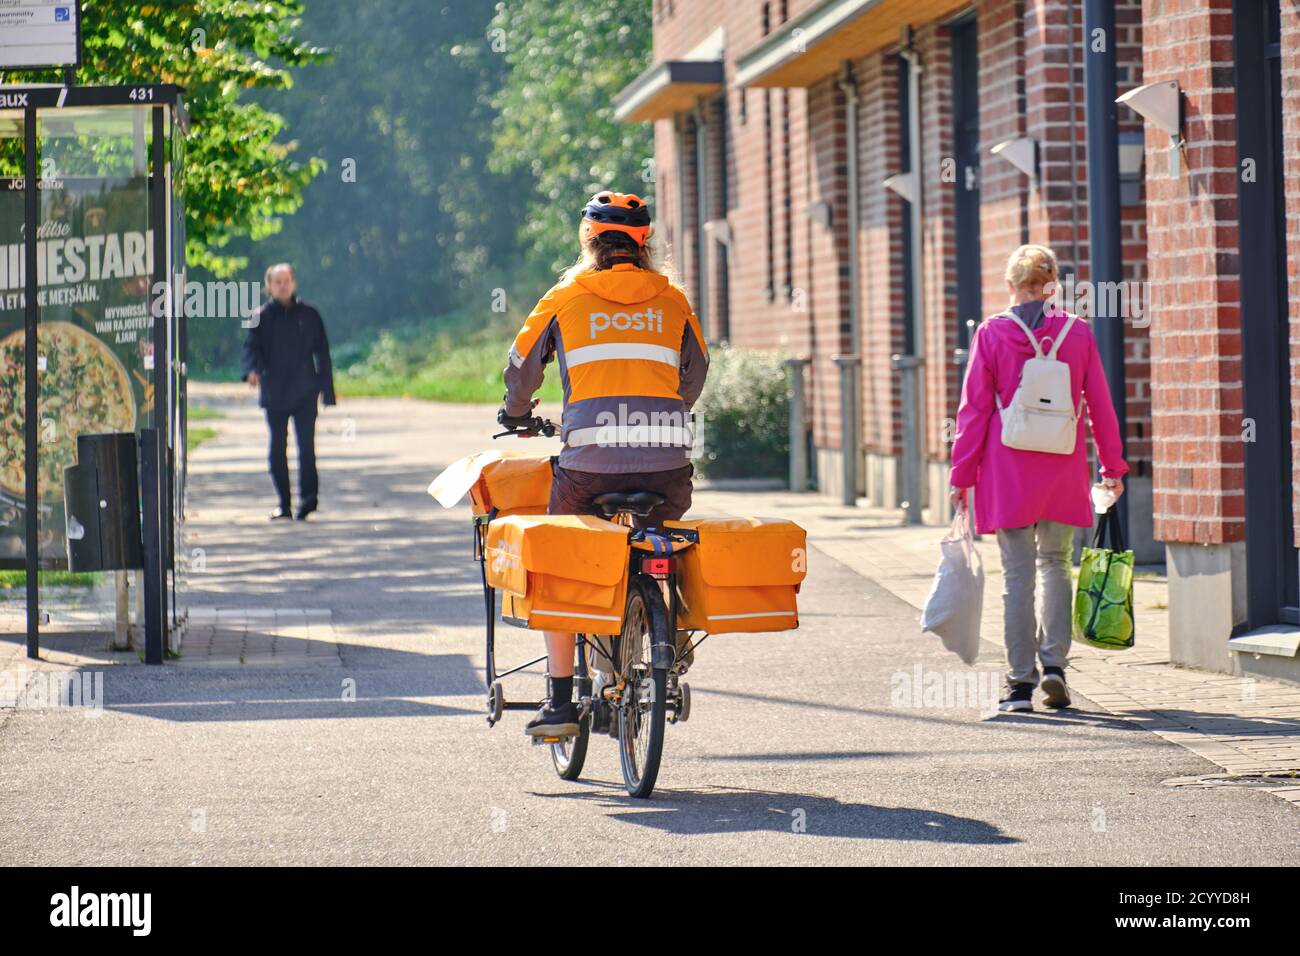 Espoo, Finland - September 24, 2020: The Finnish postman is riding the bike on the city street. Stock Photo